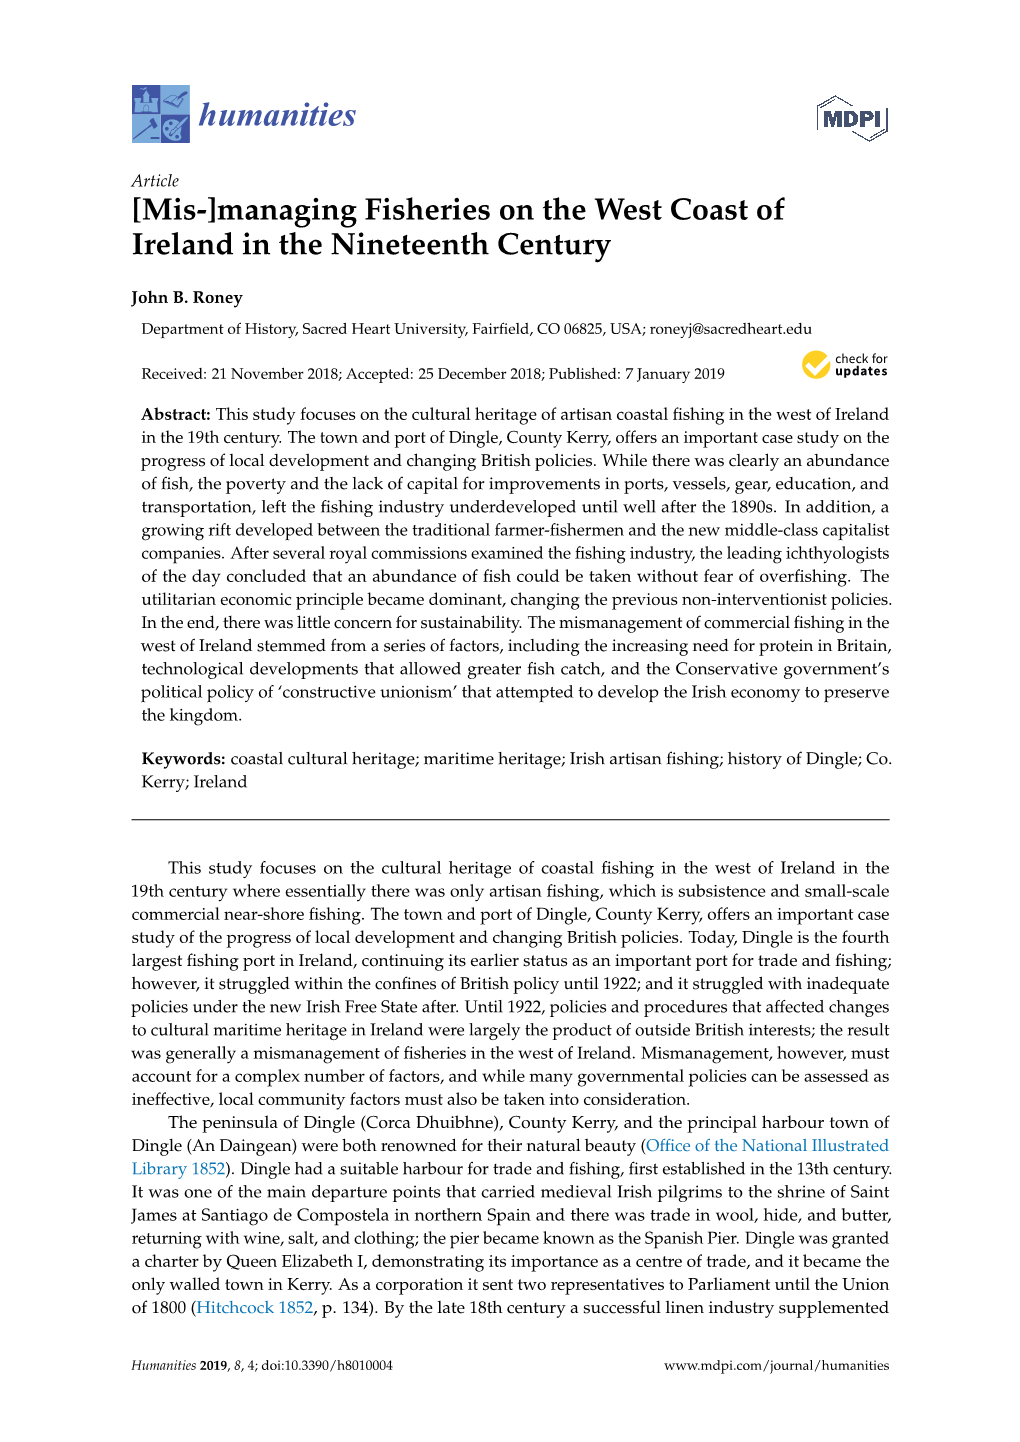 Managing Fisheries on the West Coast of Ireland in the Nineteenth Century